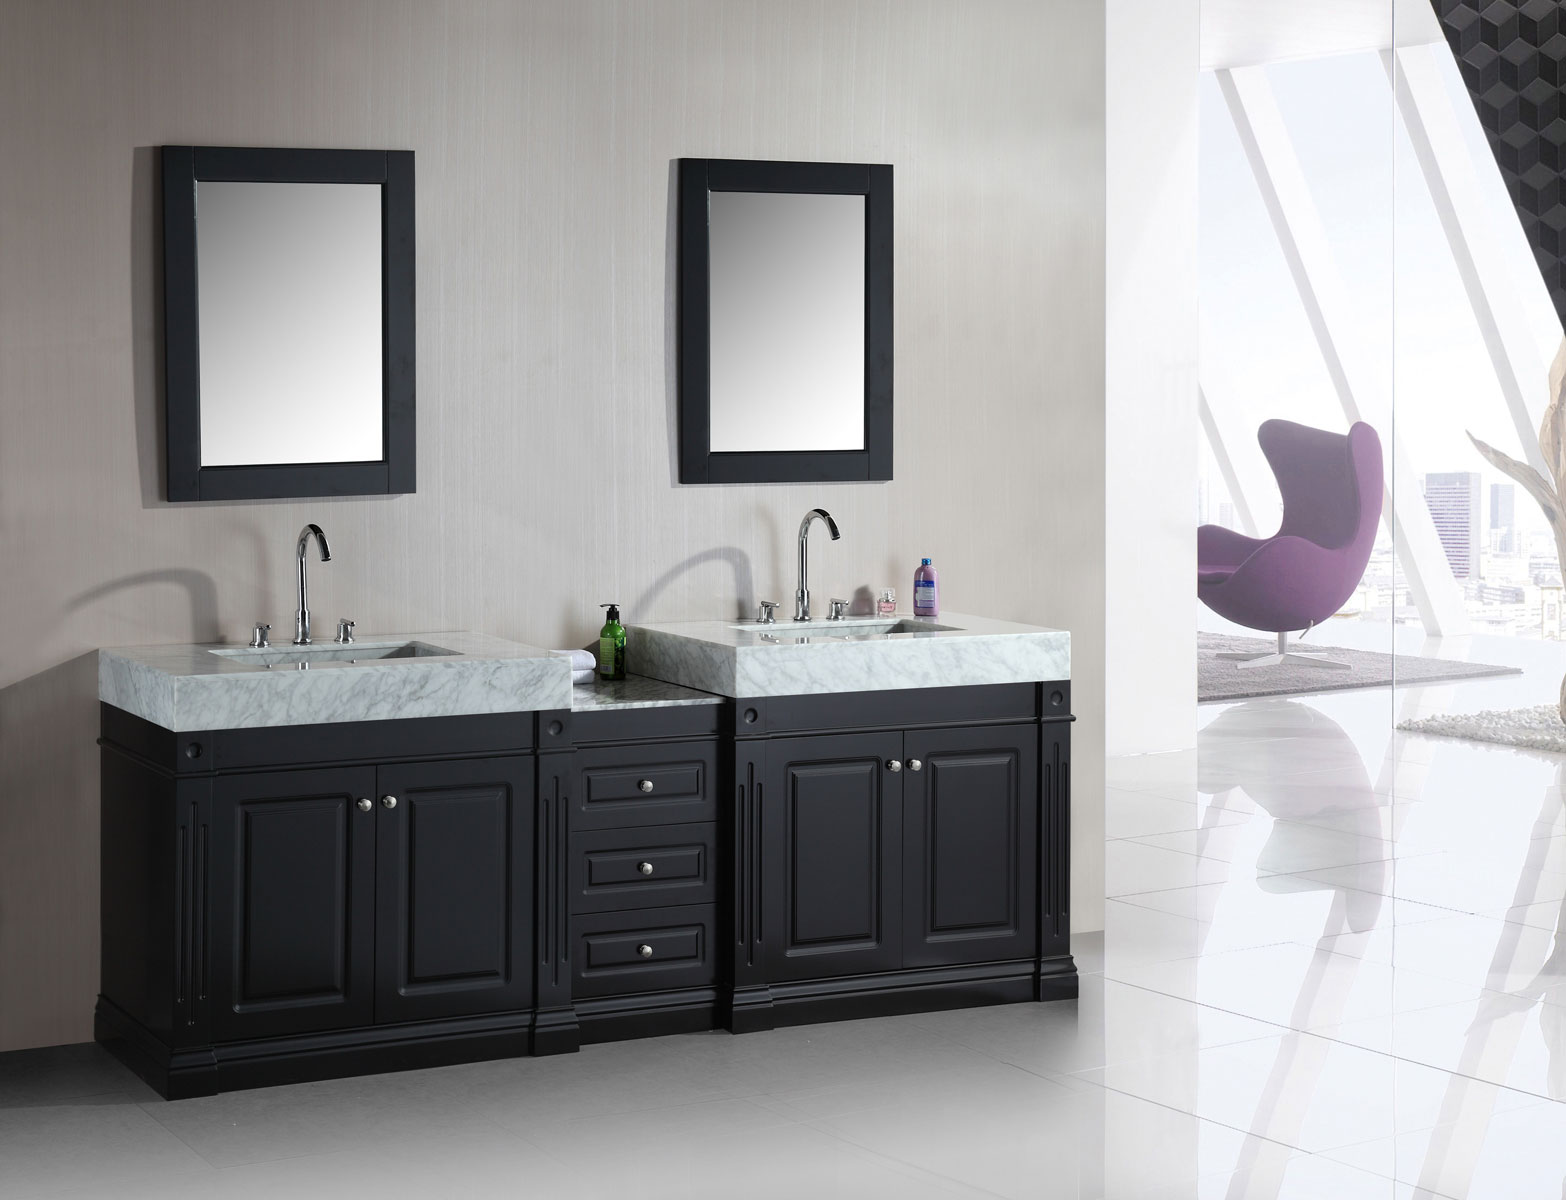 Black Bathroom Combined Gorgeous Black Bathroom Vanity Storage Combined With Double Sinks And Faucets Set Under Rectangular Wall Mirrors Design Bathroom  Double Function From Double Sink Vanity 